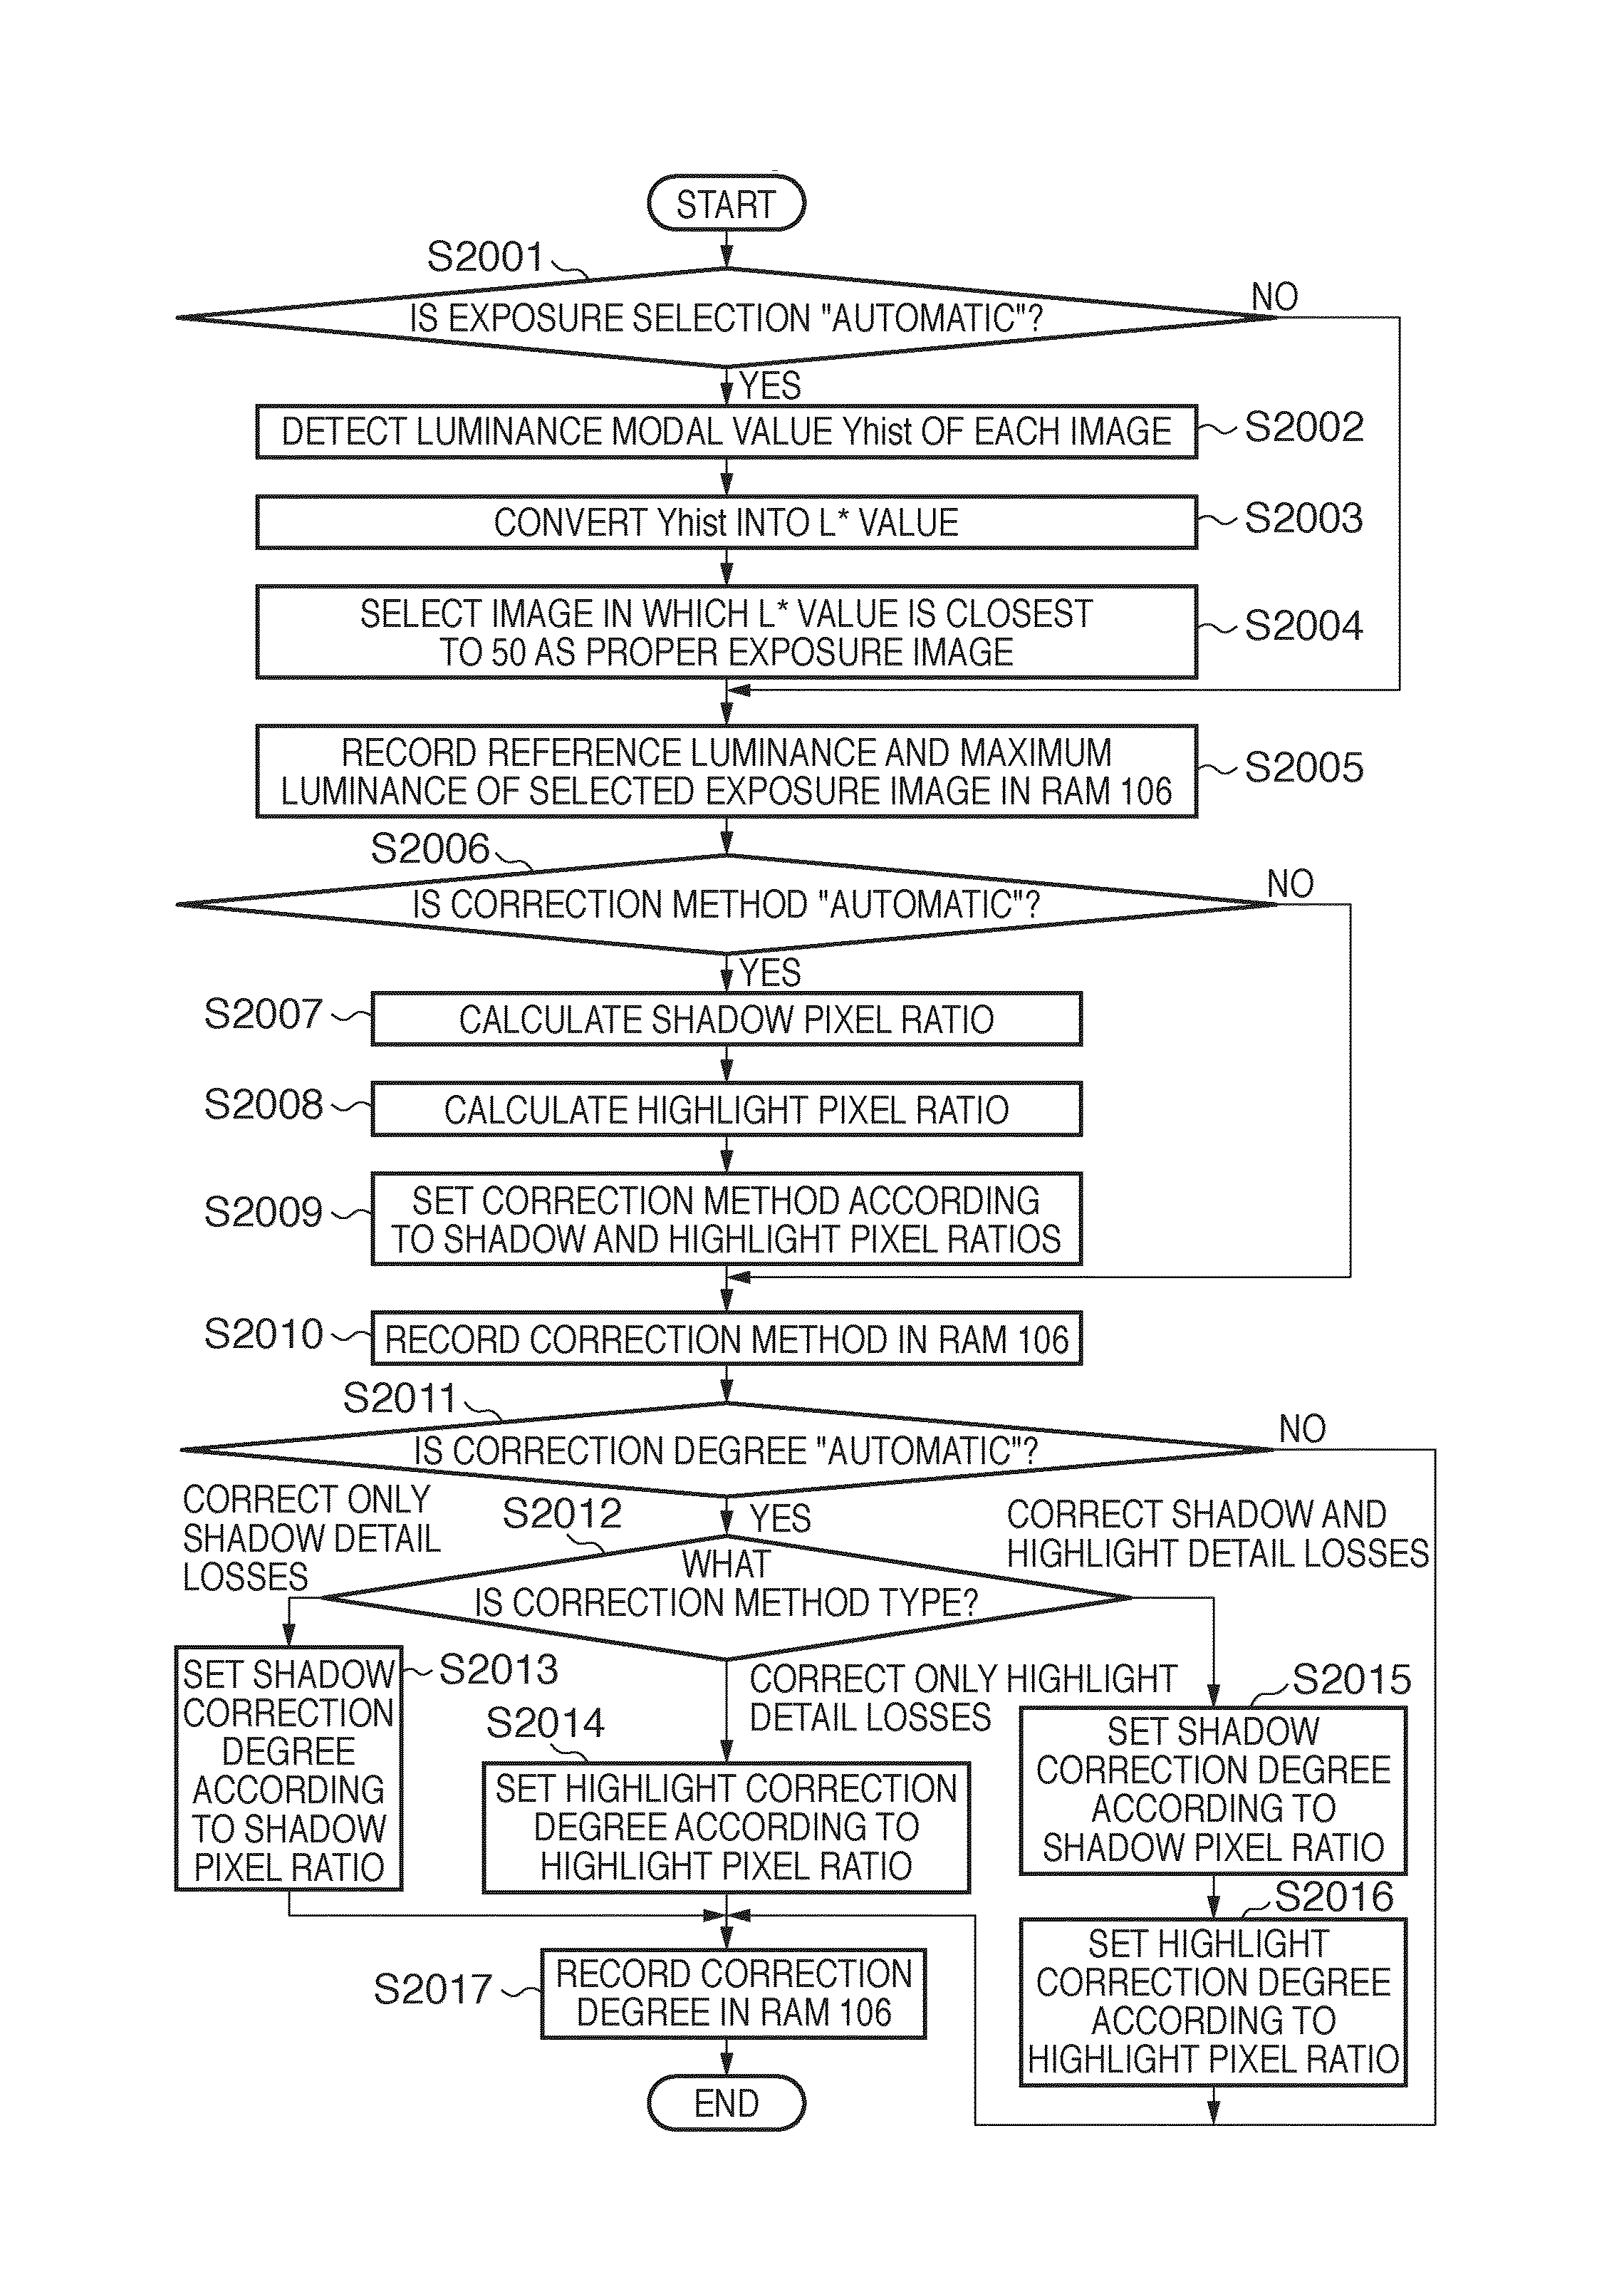 Image processing apparatus combining plural sets of image data and method for controlling the same